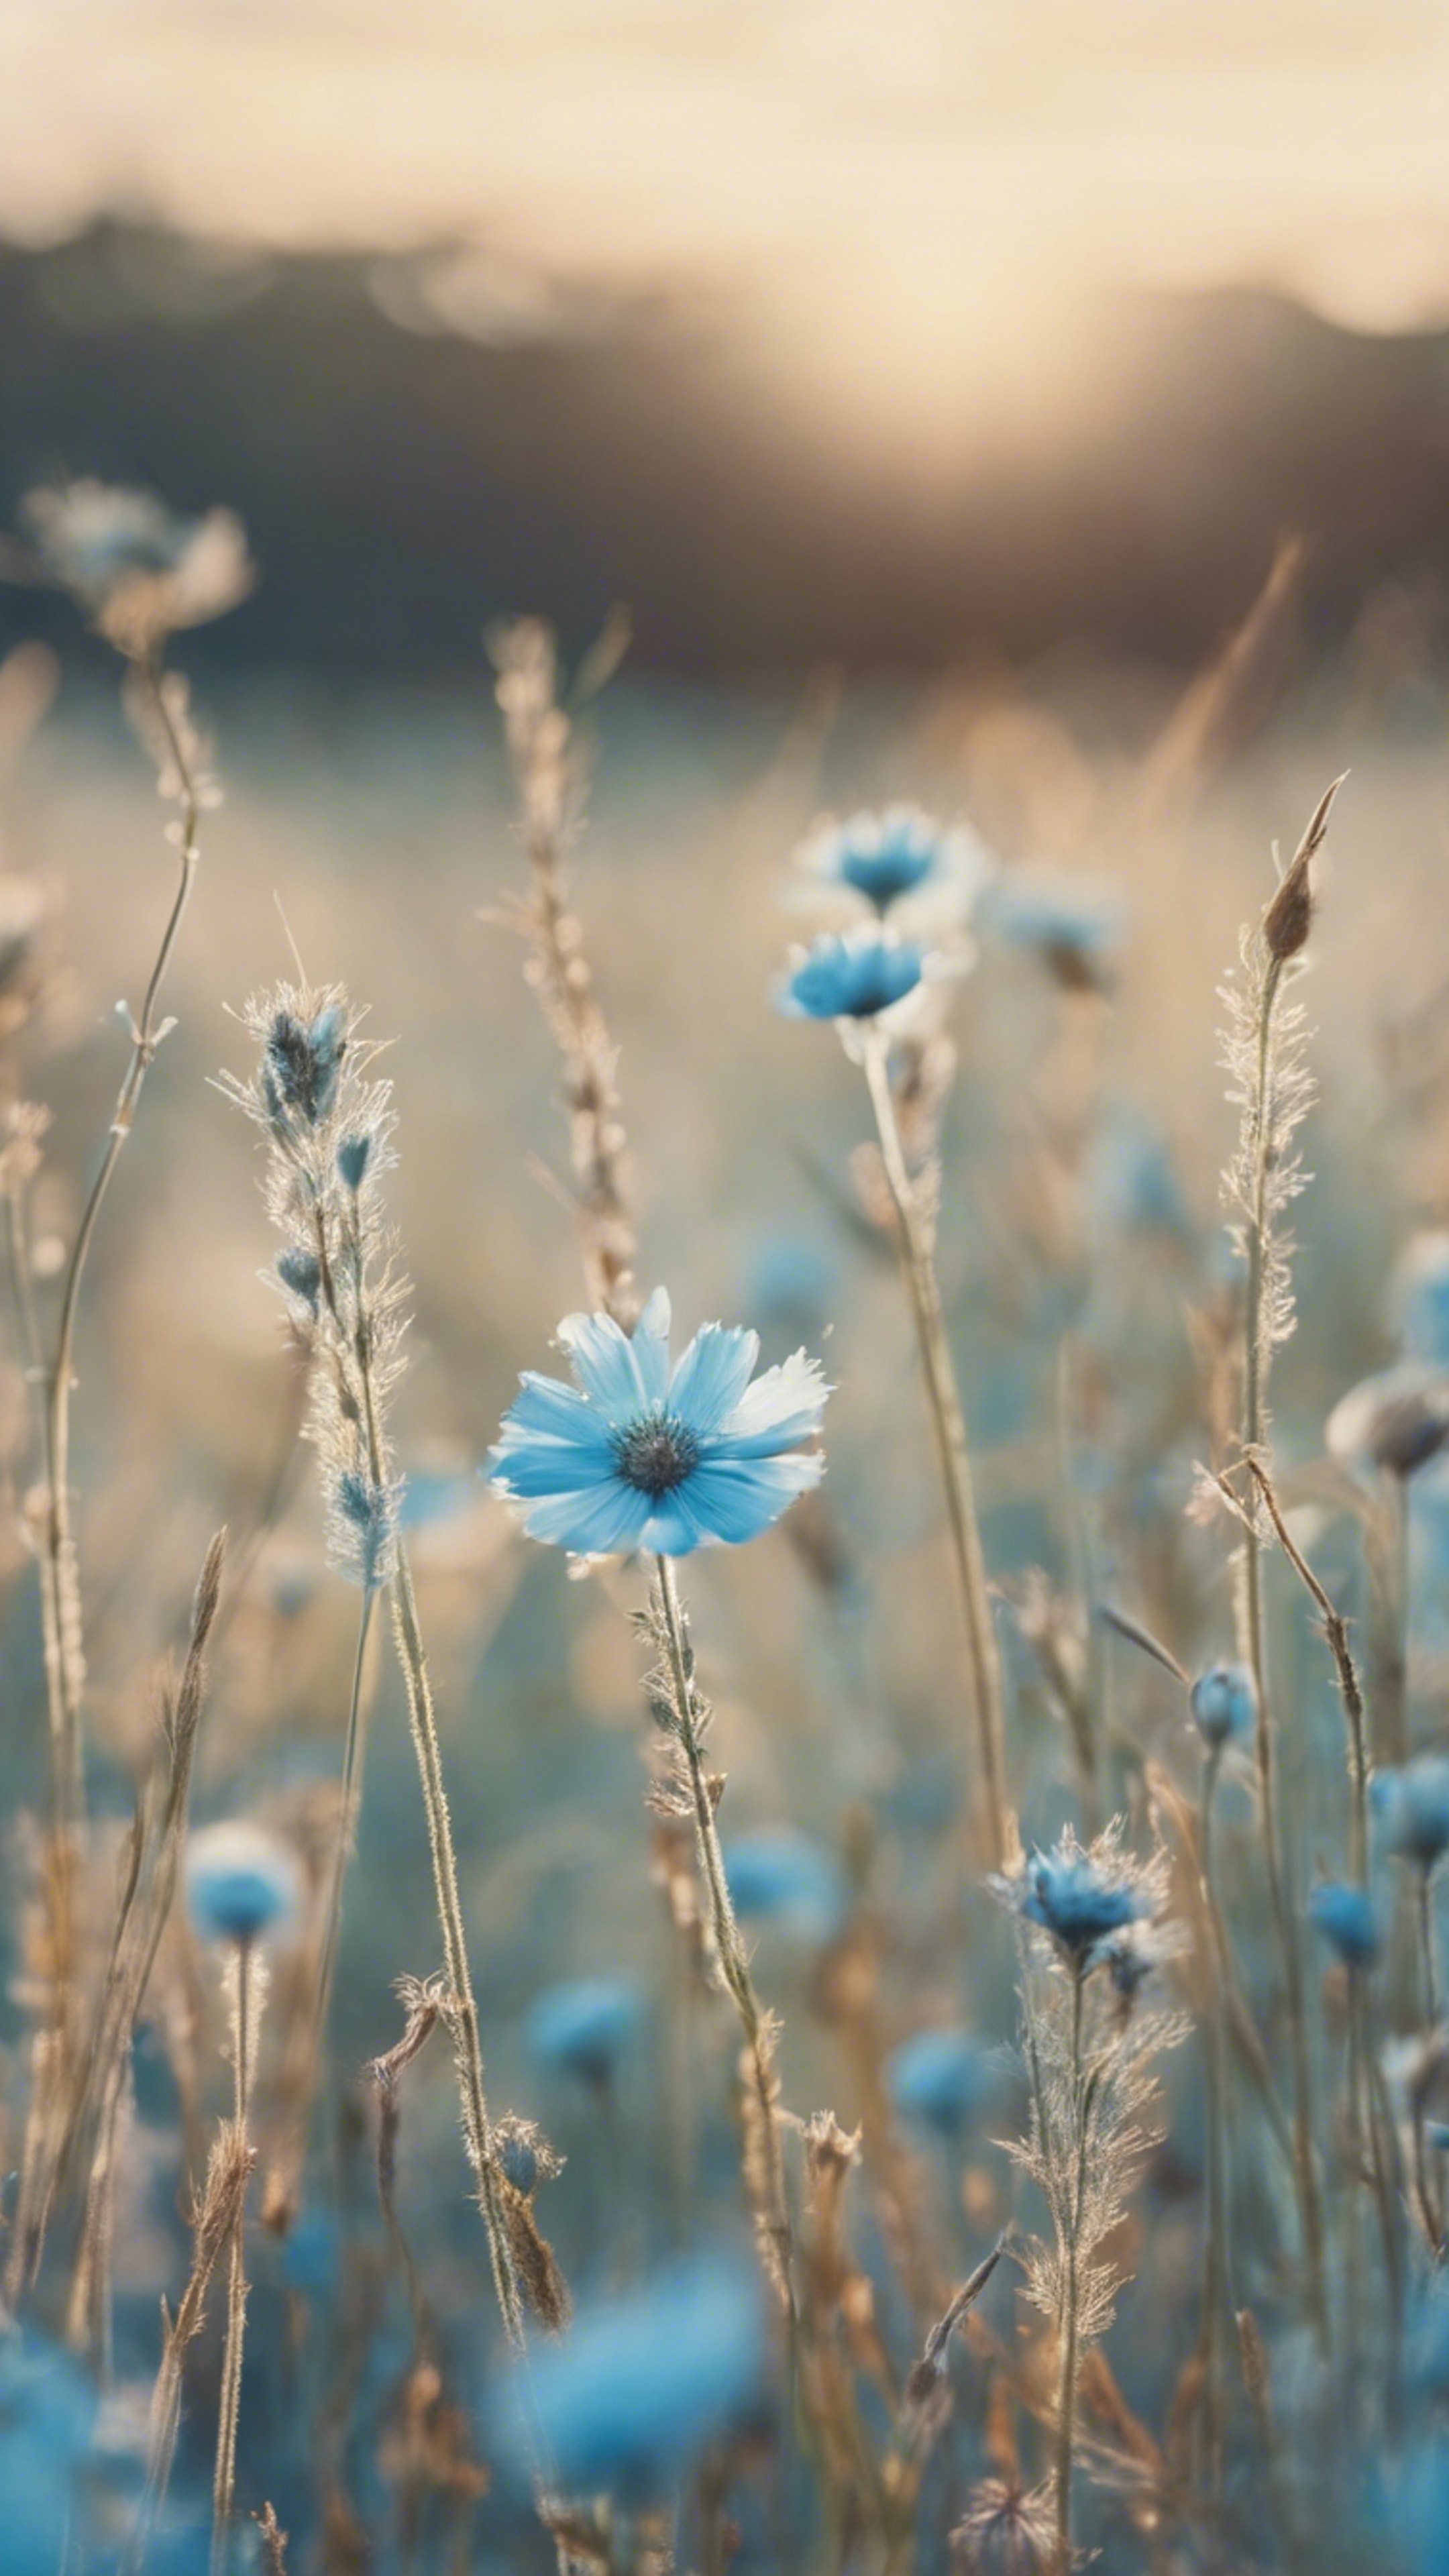 A peaceful pastel blue meadow under a clear sky.壁紙[237c4d0b569745d38be8]